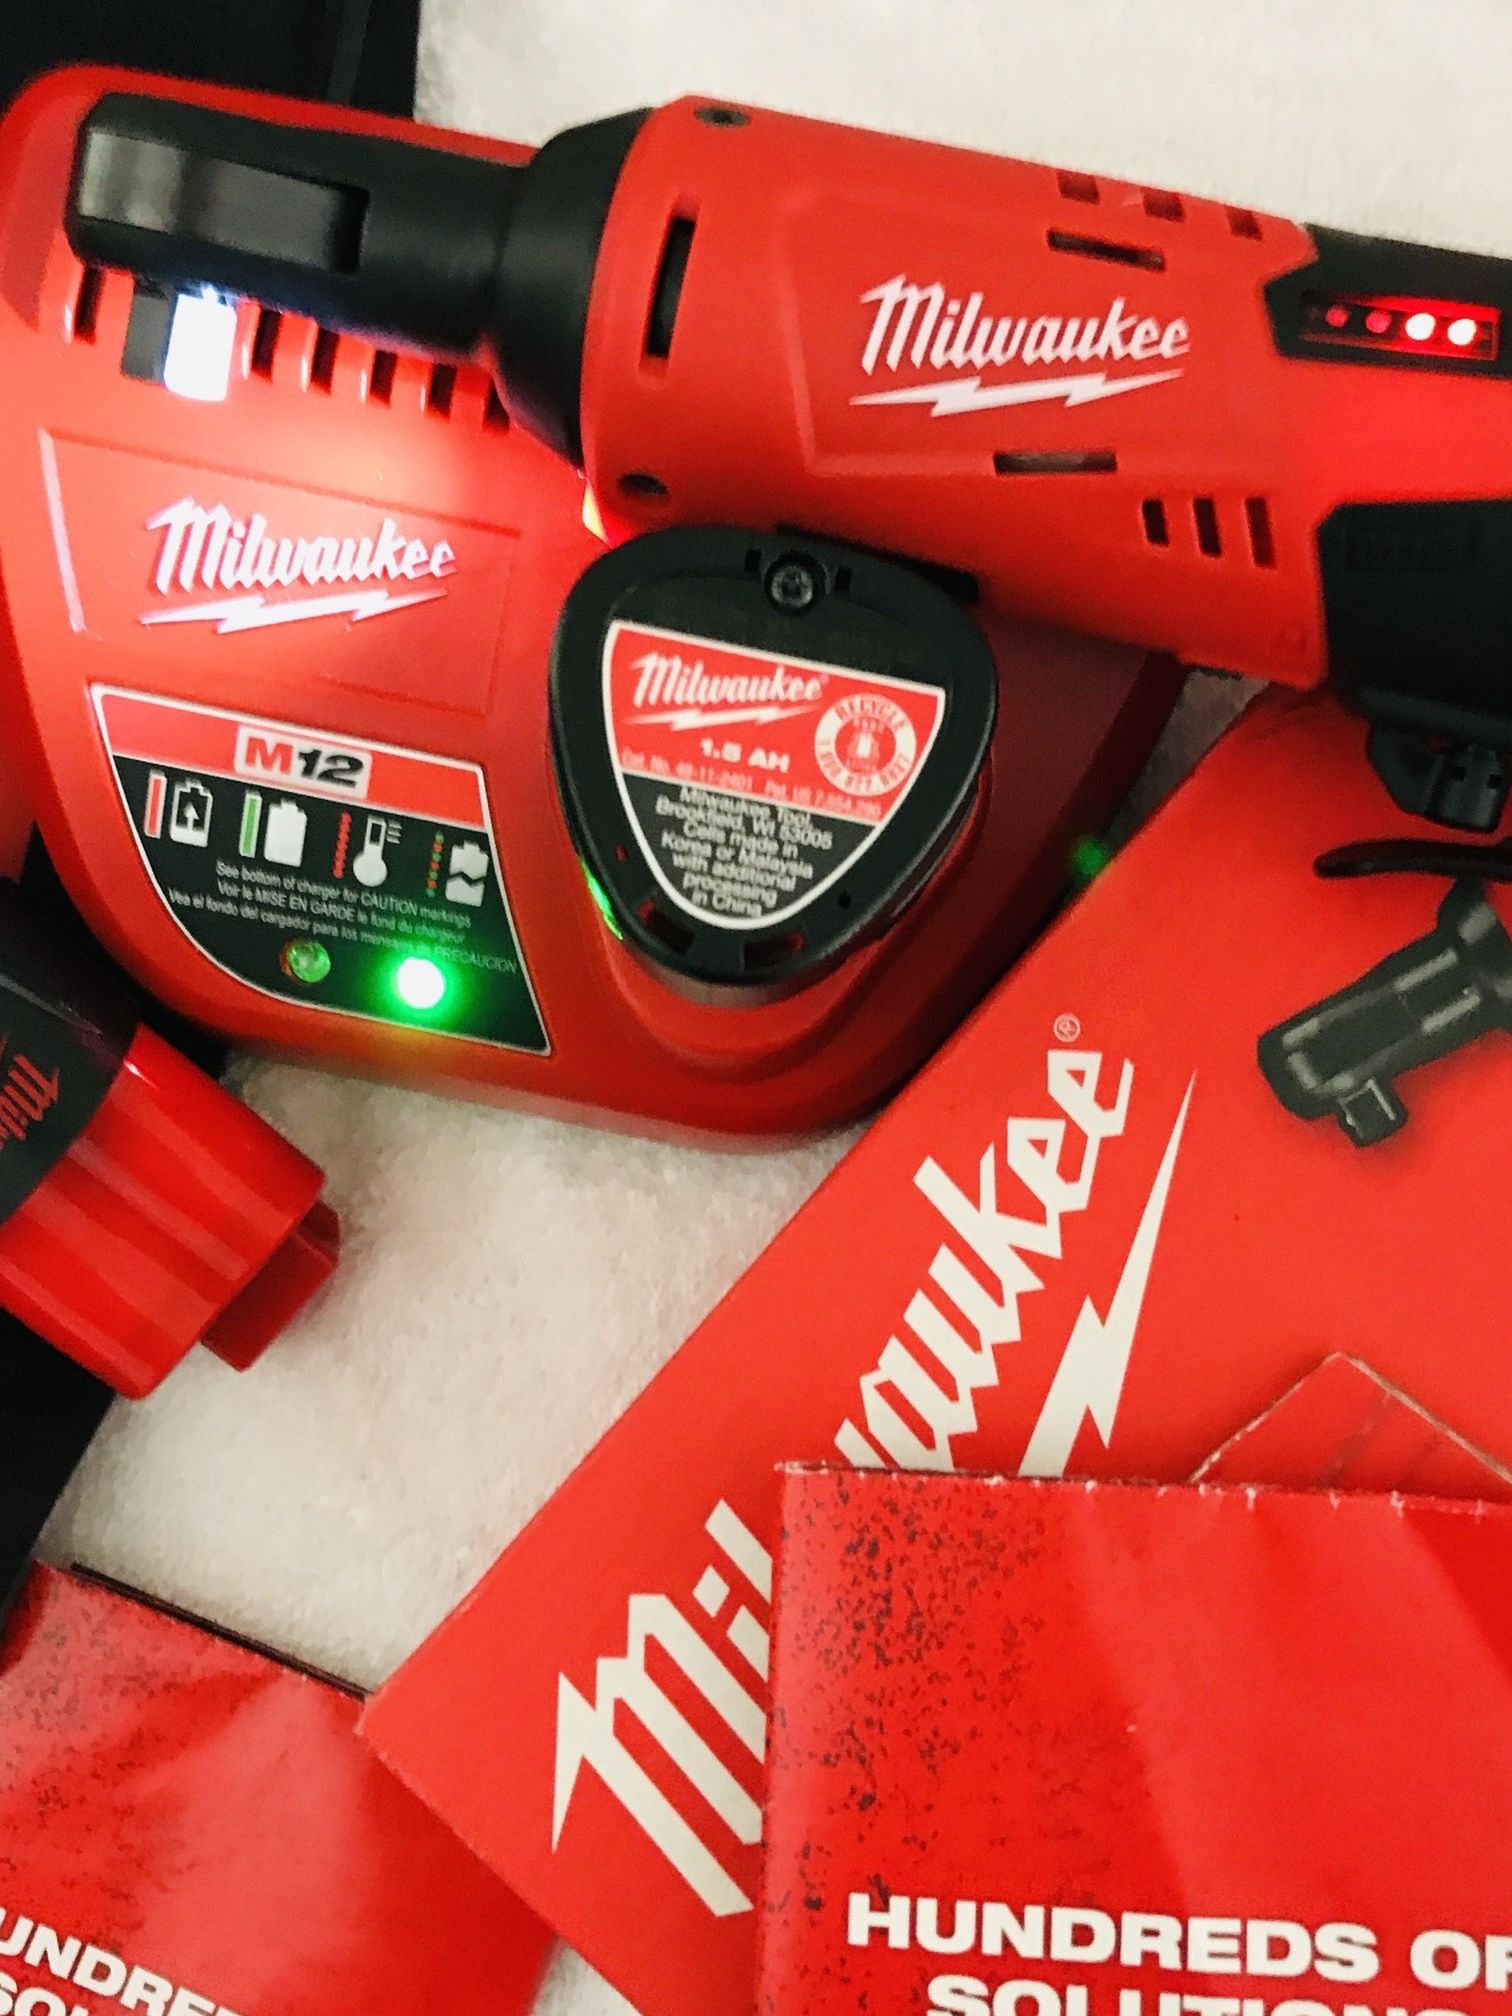 New Milwaukee M12 3/8” RATCHET Kit 2-1.5 RED LITHIUM BATTERIES -Charger-Soft Bag $155